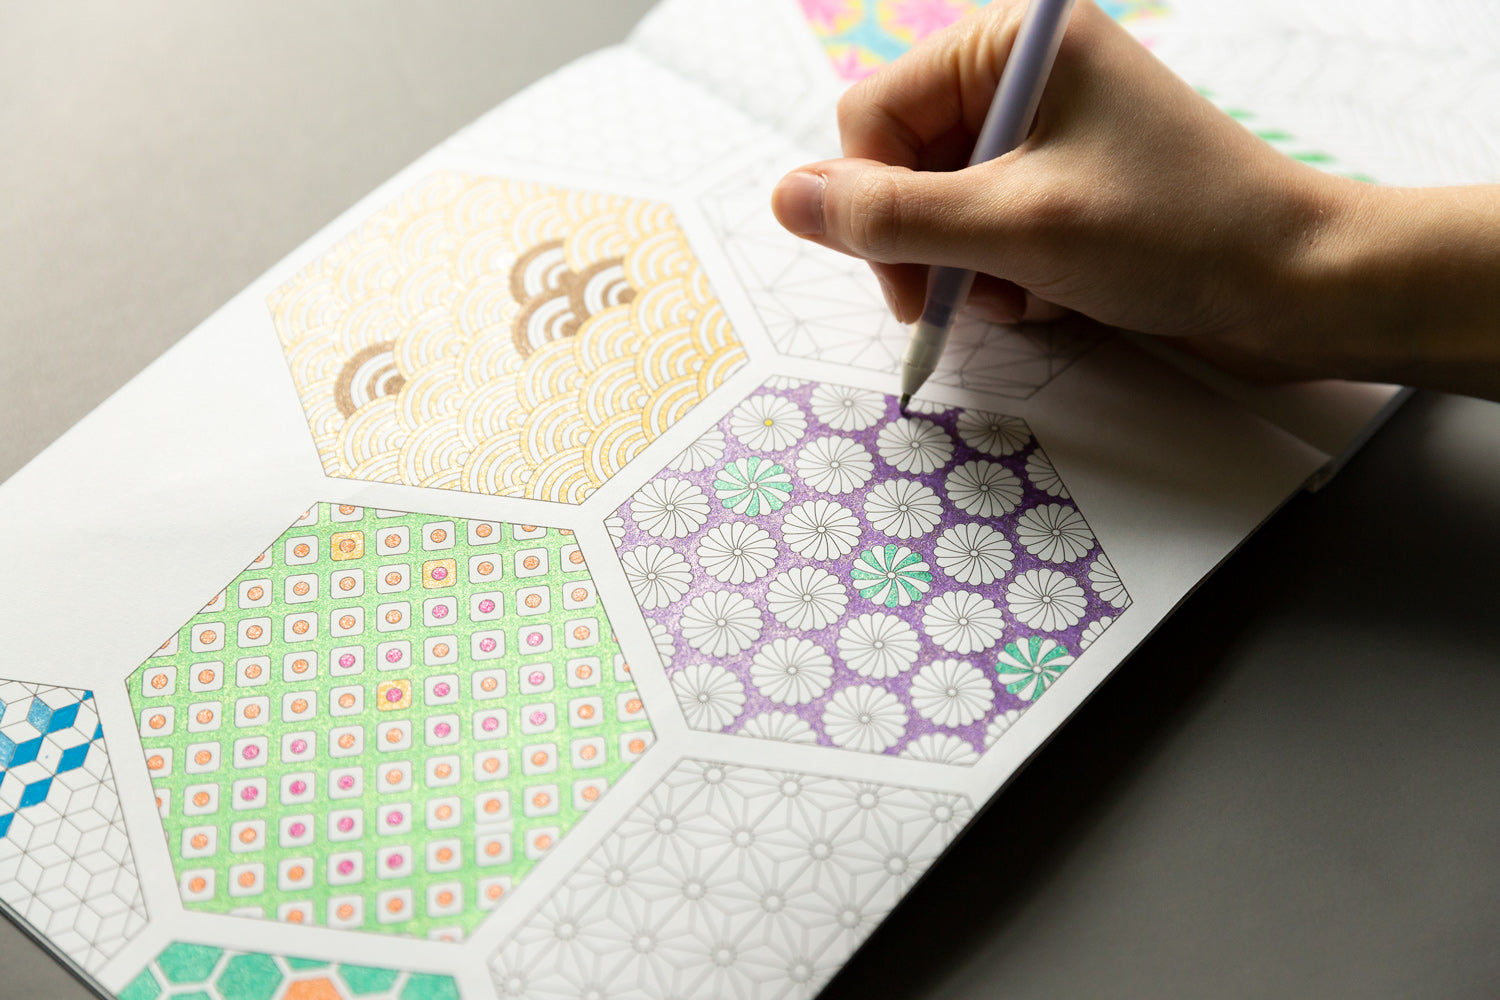 A woman's hand uses a purple colored pencil to color in a pattern of flowers in a coloring book.